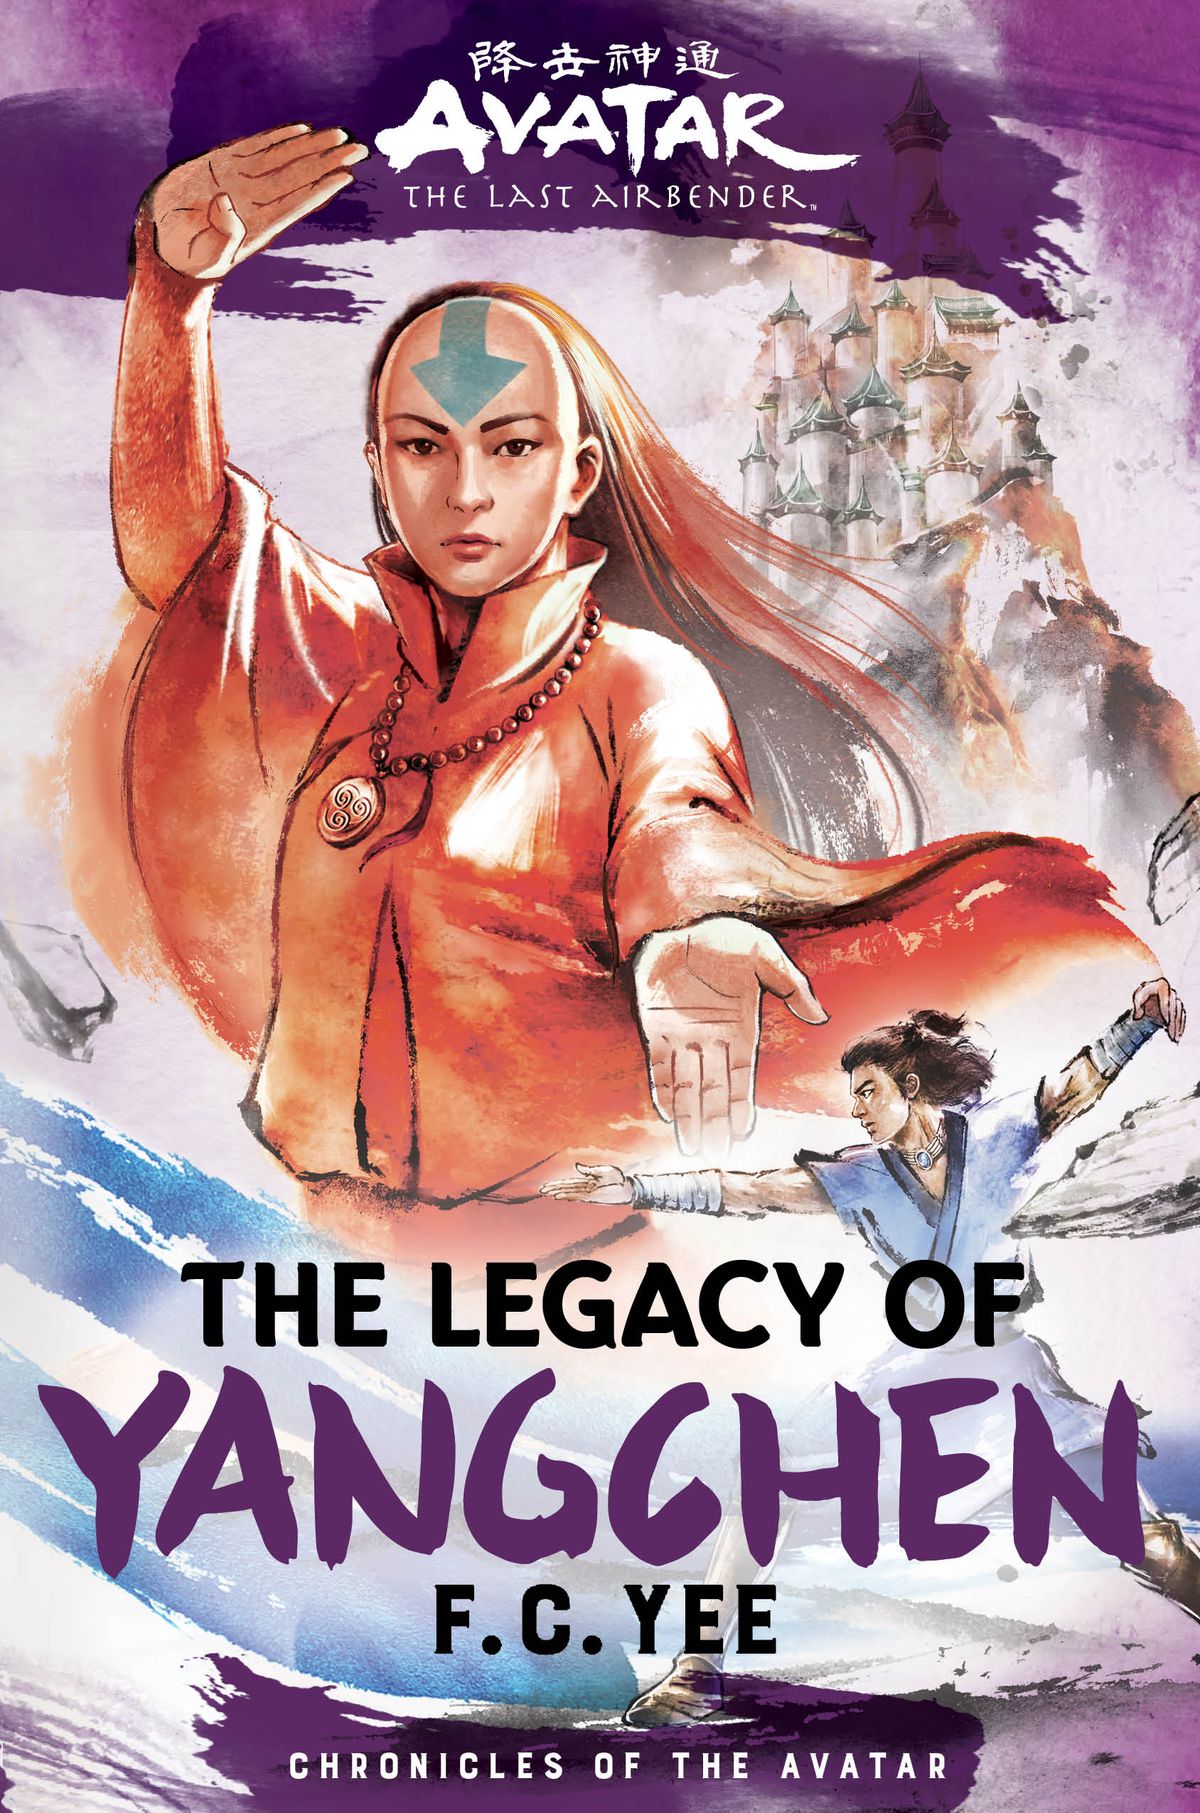 The book cover for F.C. Yee’s Avatar: The Last Airbender novel The Legacy of Yangchen, showing a young airbender in orange with the traditional half-shaved head and blue arrow forehead tattoo, with a white-turreted castle on a snowy mountaintop in the distance behind her, and a male waterbender in a martial-arts stance inset below her